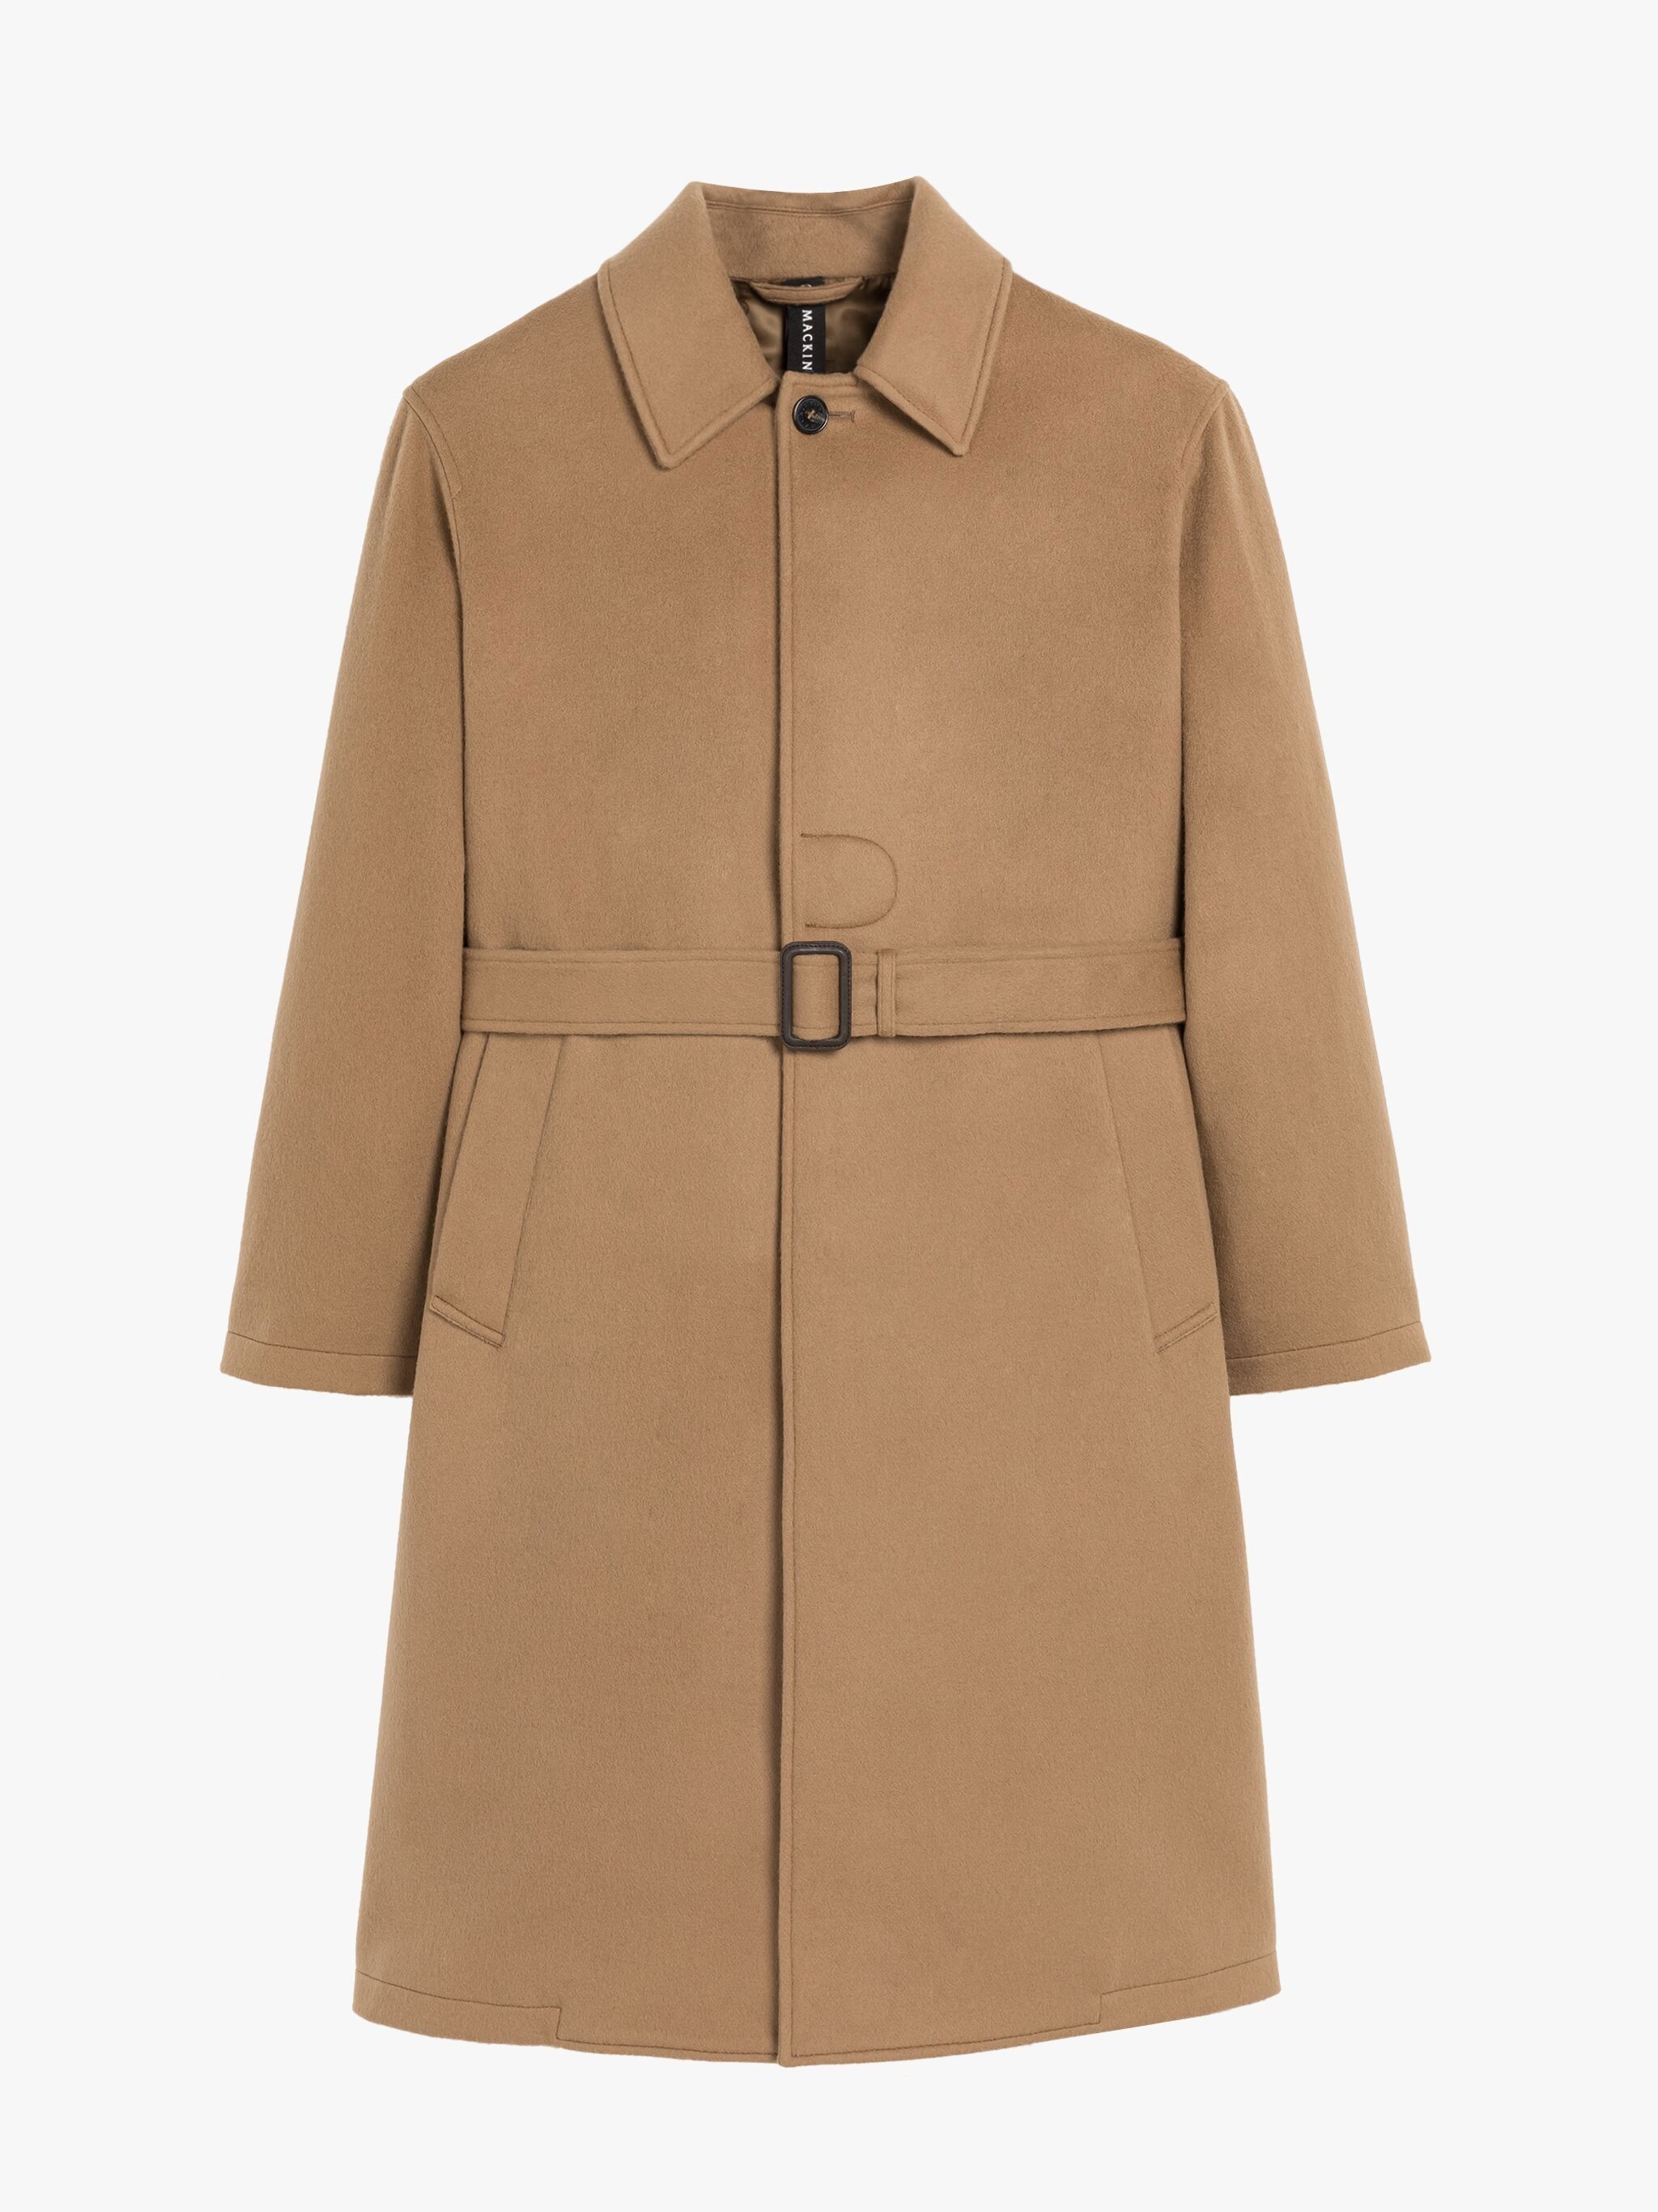 MILAN BEIGE WOOL & CASHMERE SINGLE-BREASTED TRENCH COAT - 1